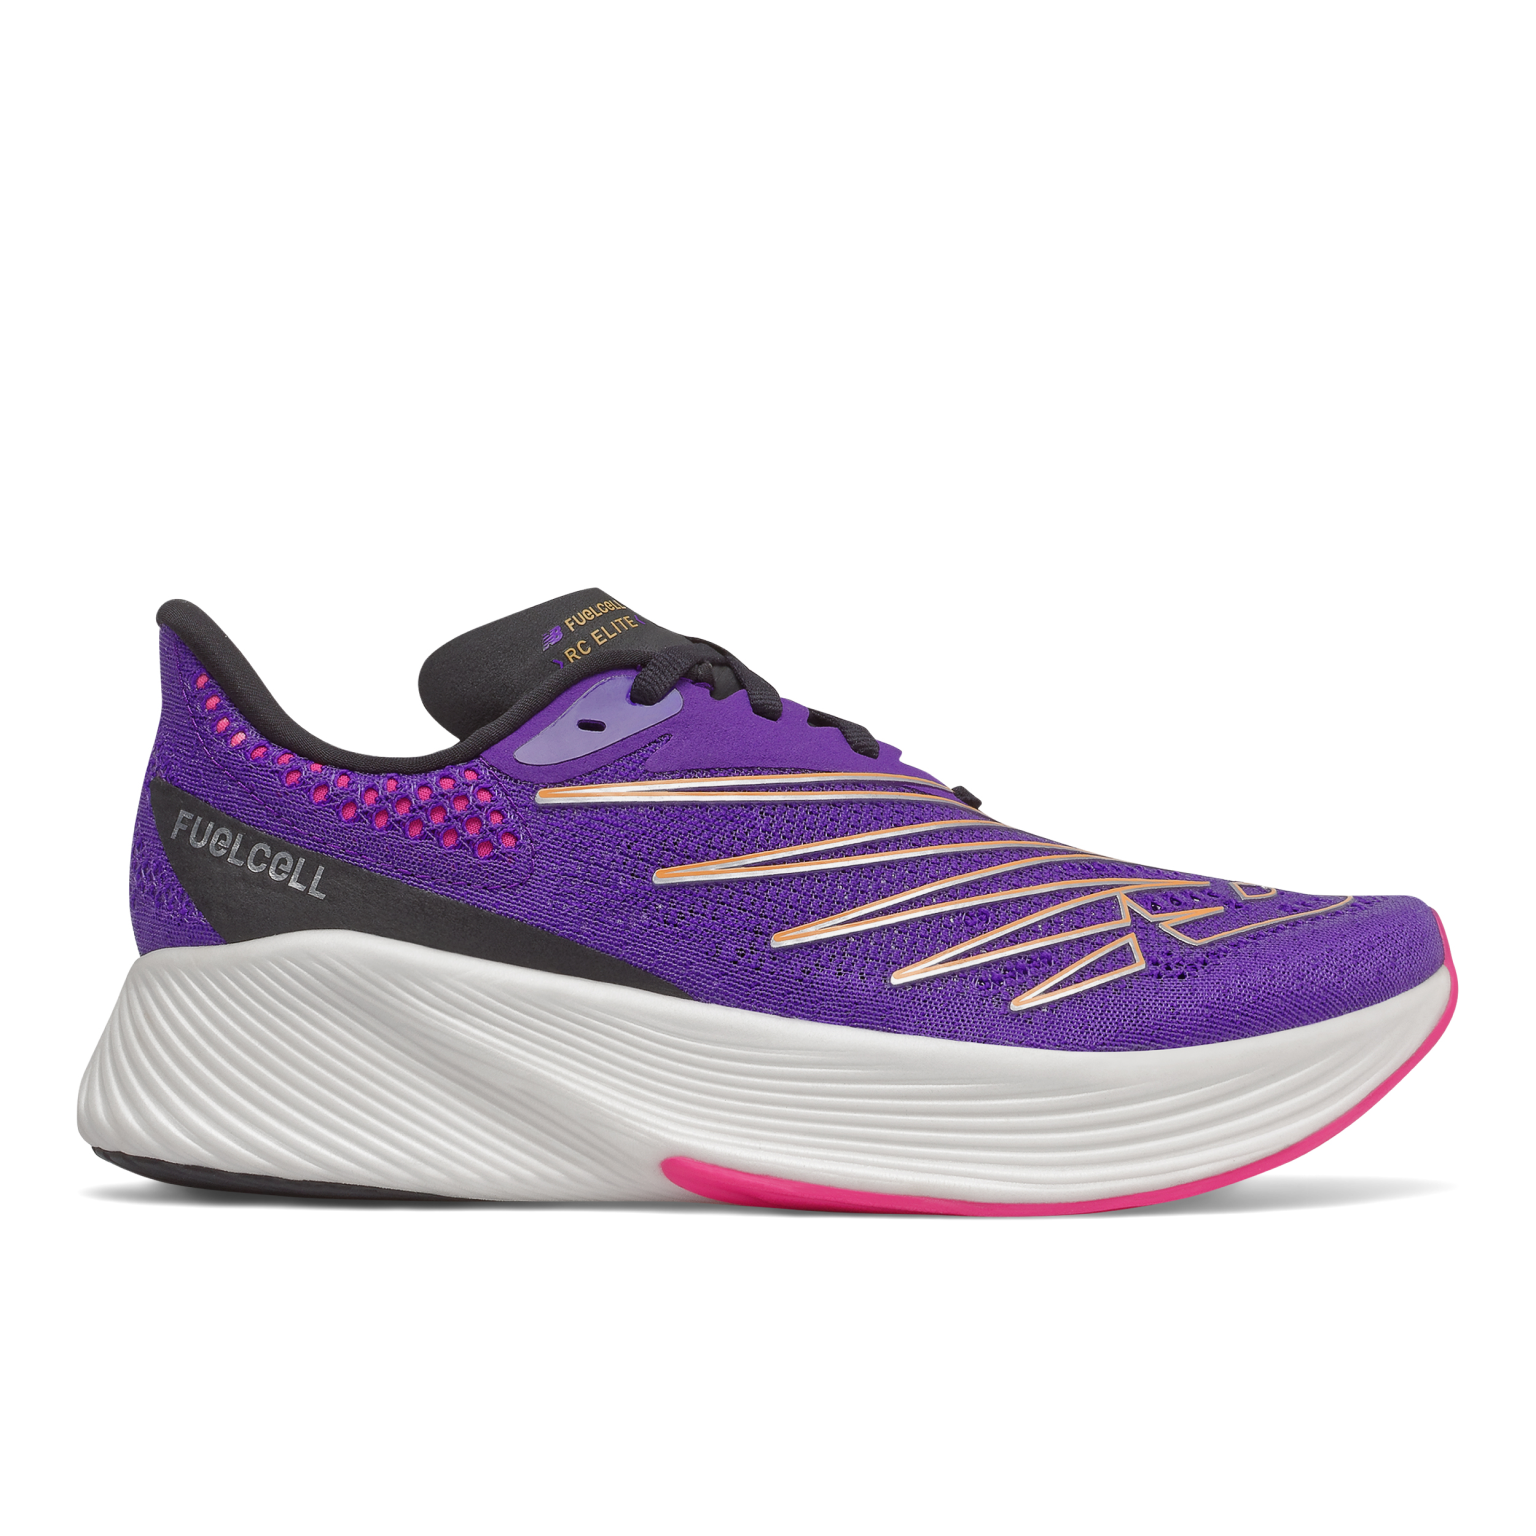 New Balance FuelCell RC Elite V2 Womens Running